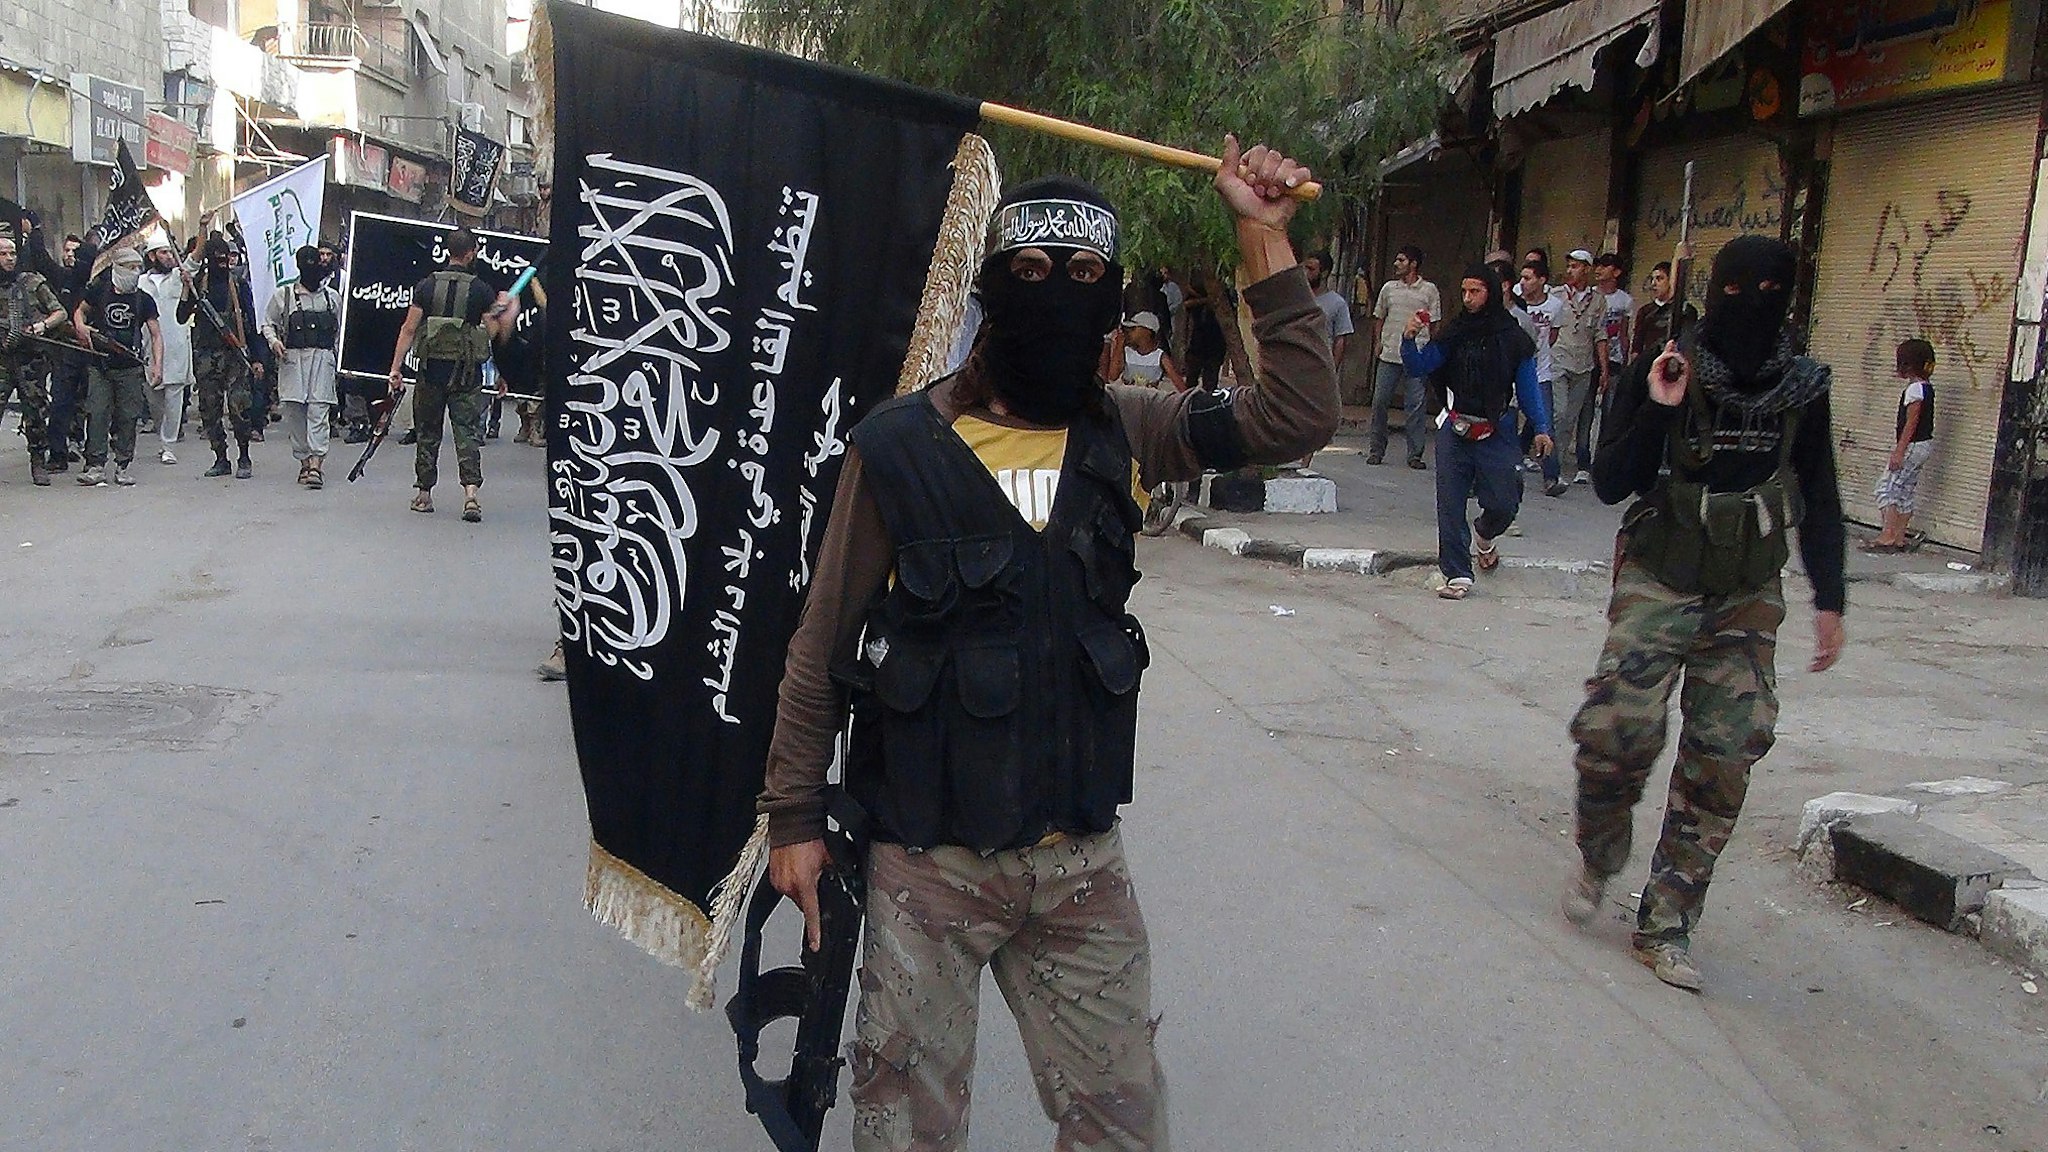 Islamic fighters from the al-Qaida group in the Levant, Al-Nusra Front, wave their movement's flag as they parade at the Yarmuk Palestinian refugee camp, south of Damascus, to denounce Israels military offensive on the Gaza Strip, on July 28, 2014. Israeli shells struck a UN school in Gaza early today, killing 16, as ground troops made a signficant push into the territory despite Palestinian efforts to broker a 24-hour truce. AFP PHOTO/RAMI AL-SAYED